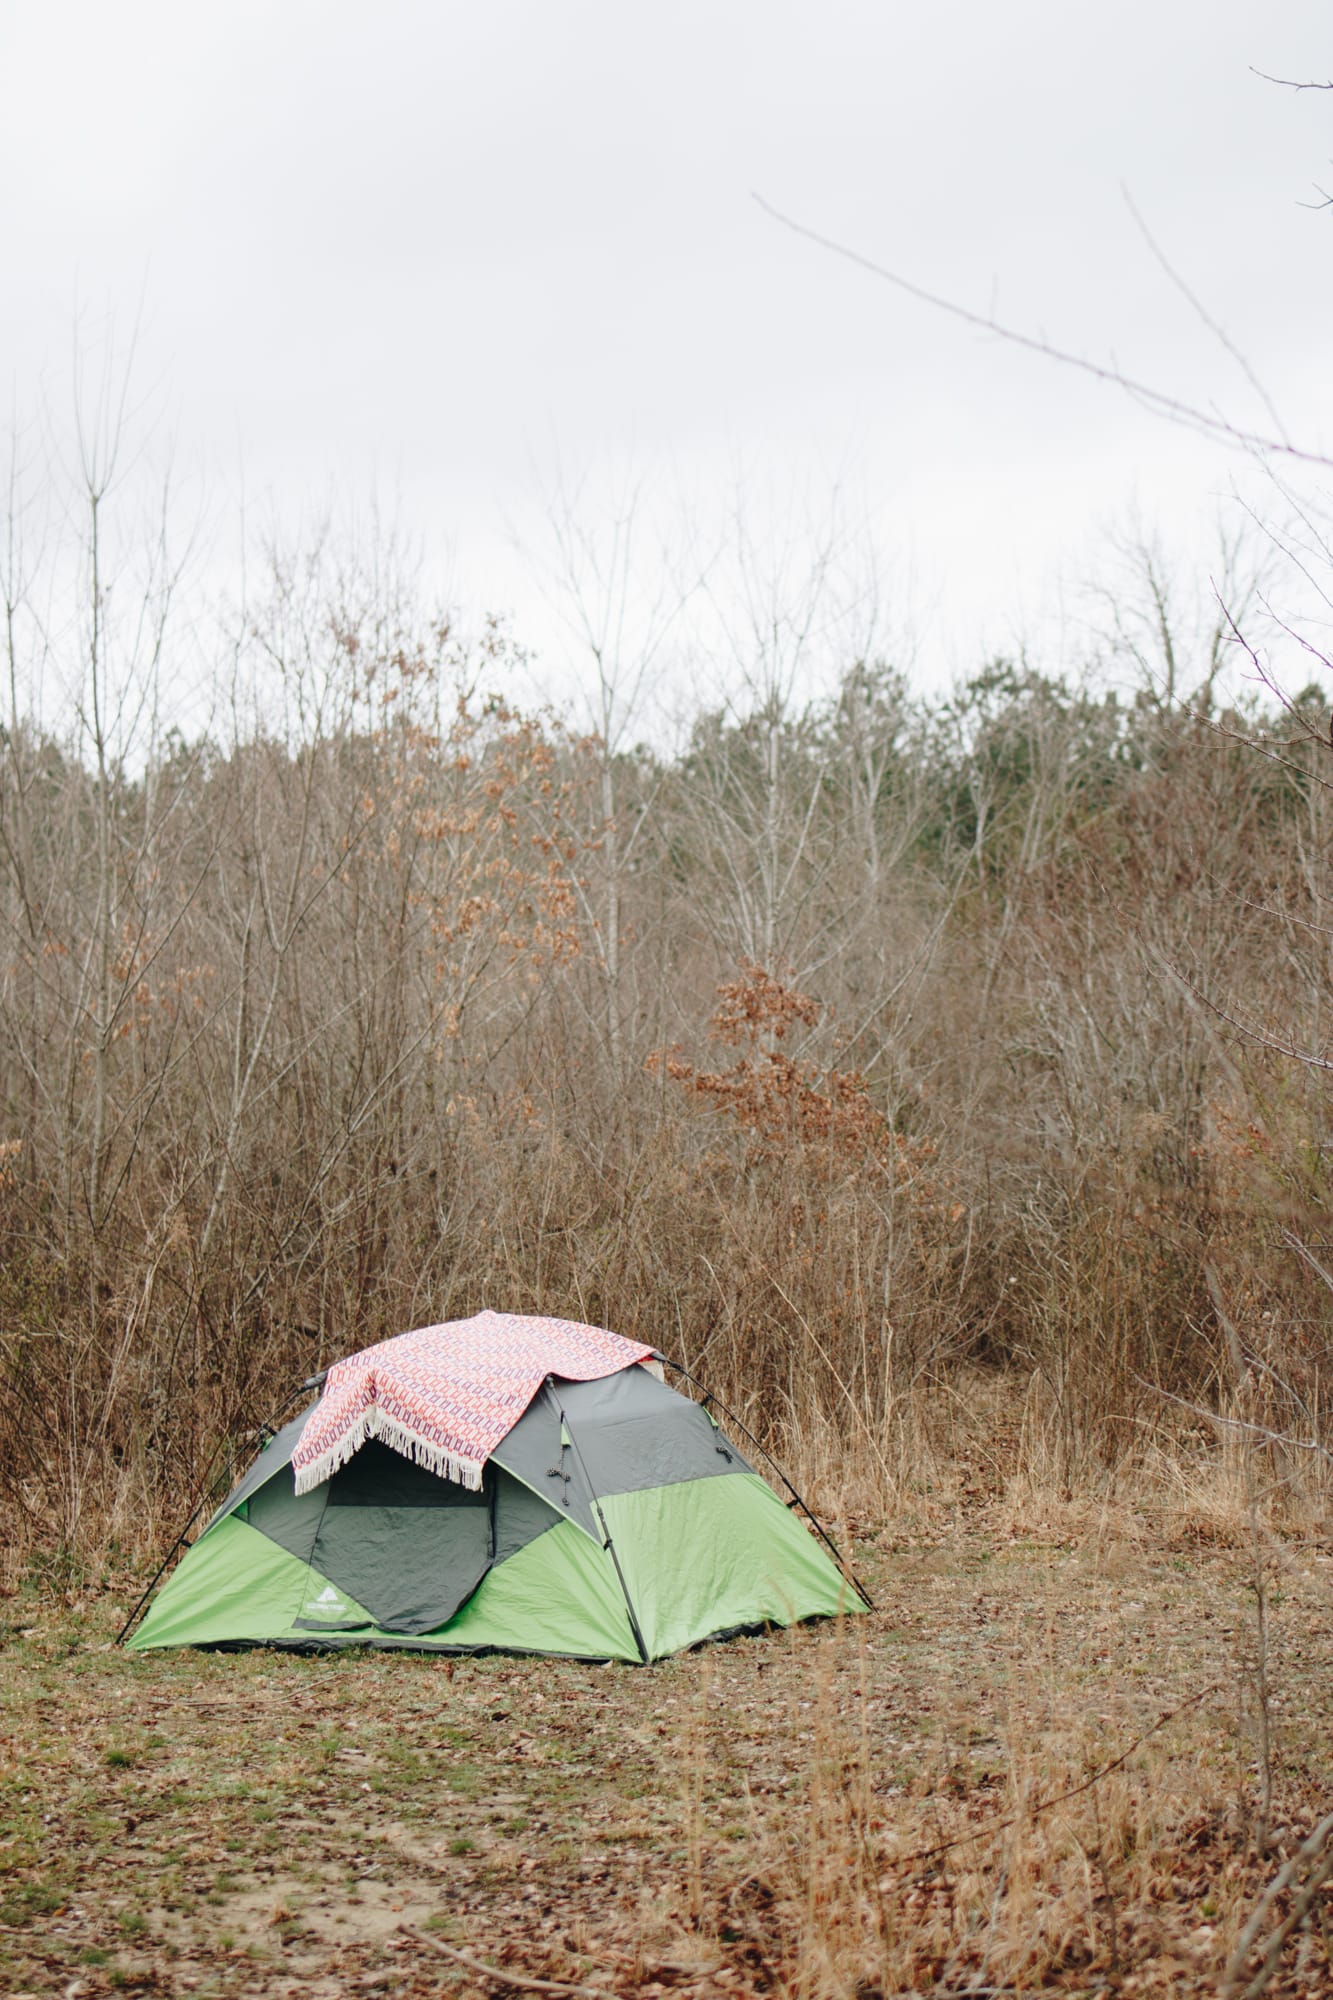 We set up camp in a private space surrounded by brush and trees. 